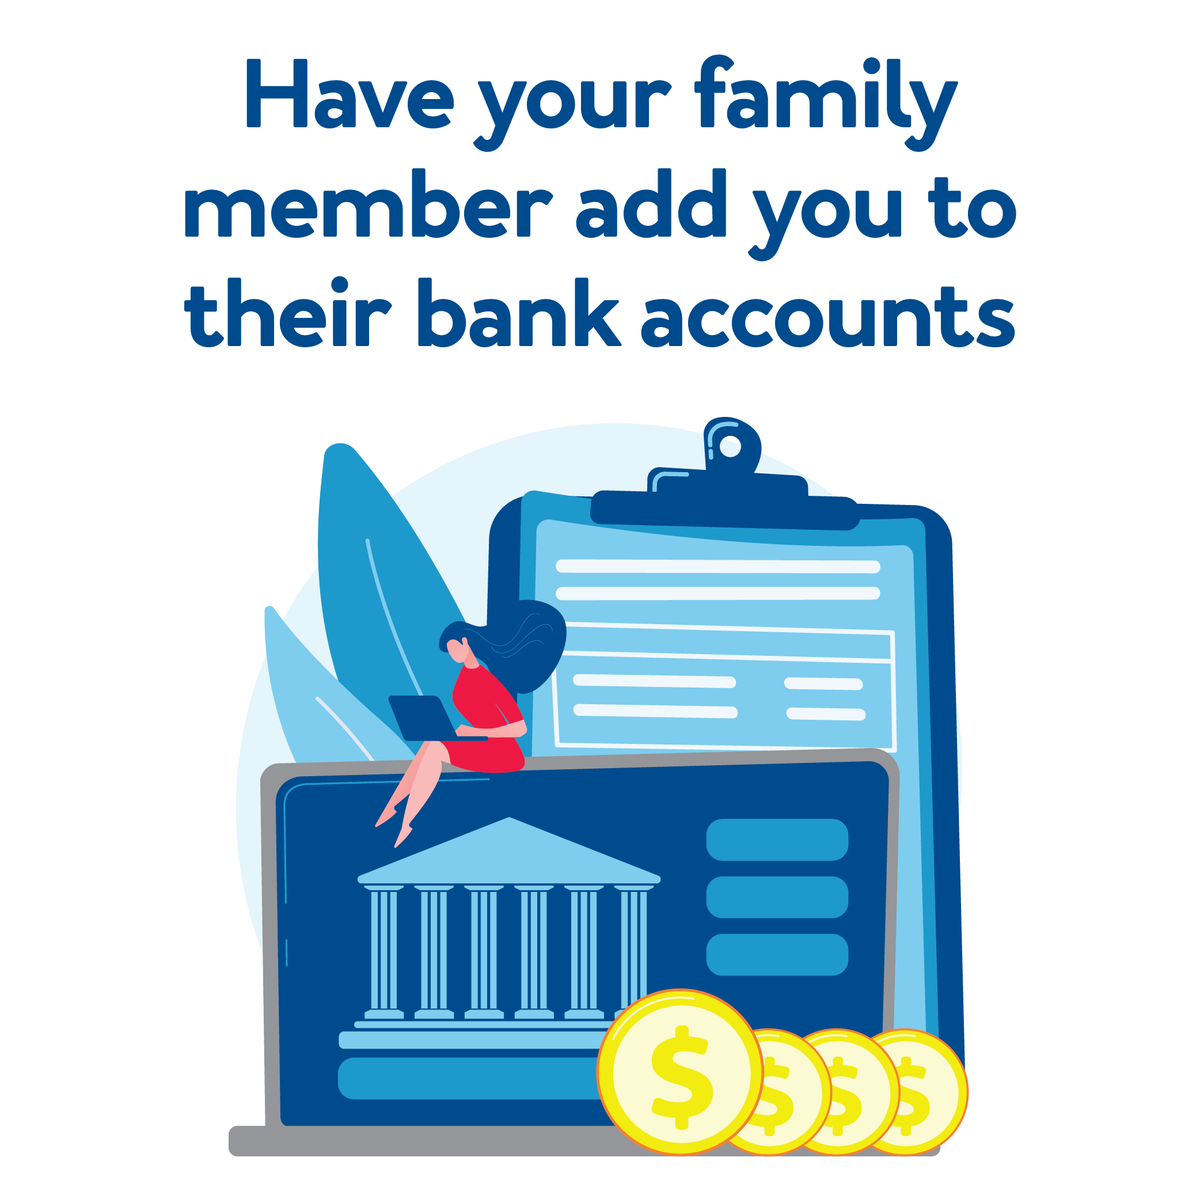 A cartoon surrounded by money and bank information. Text, “Have your family member add you to their bank accounts”